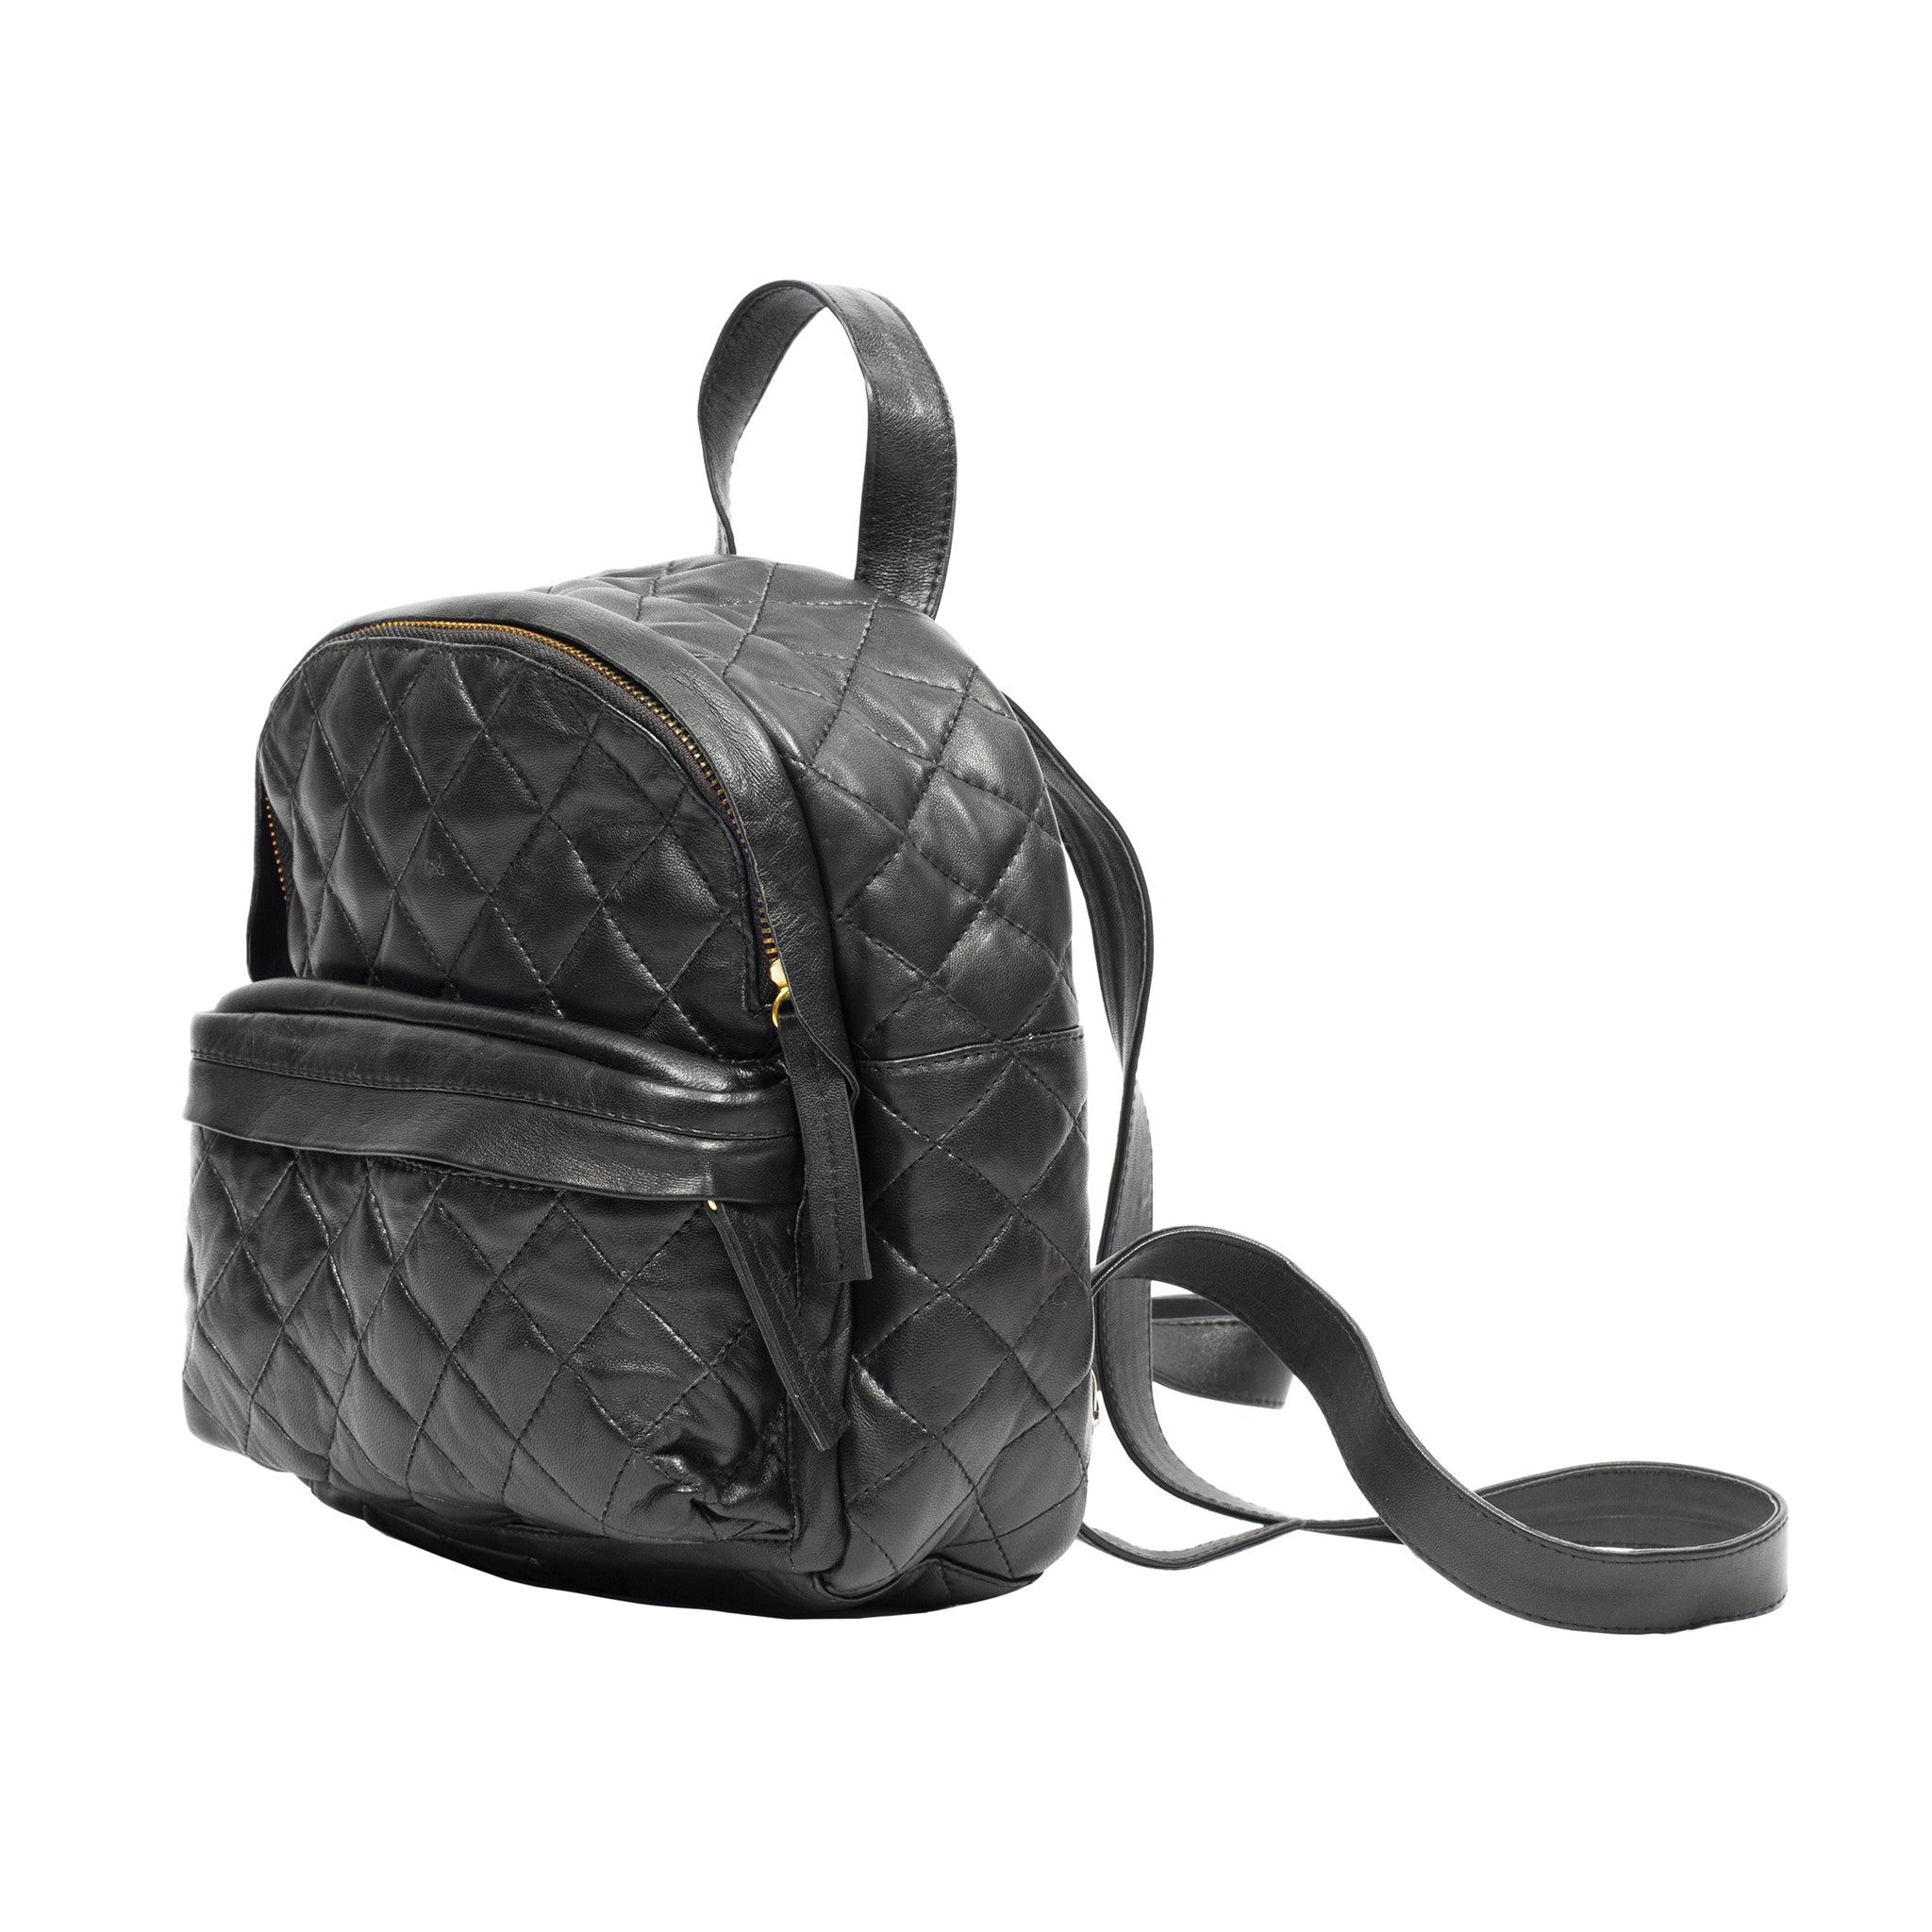 quilted black leather small women backpack